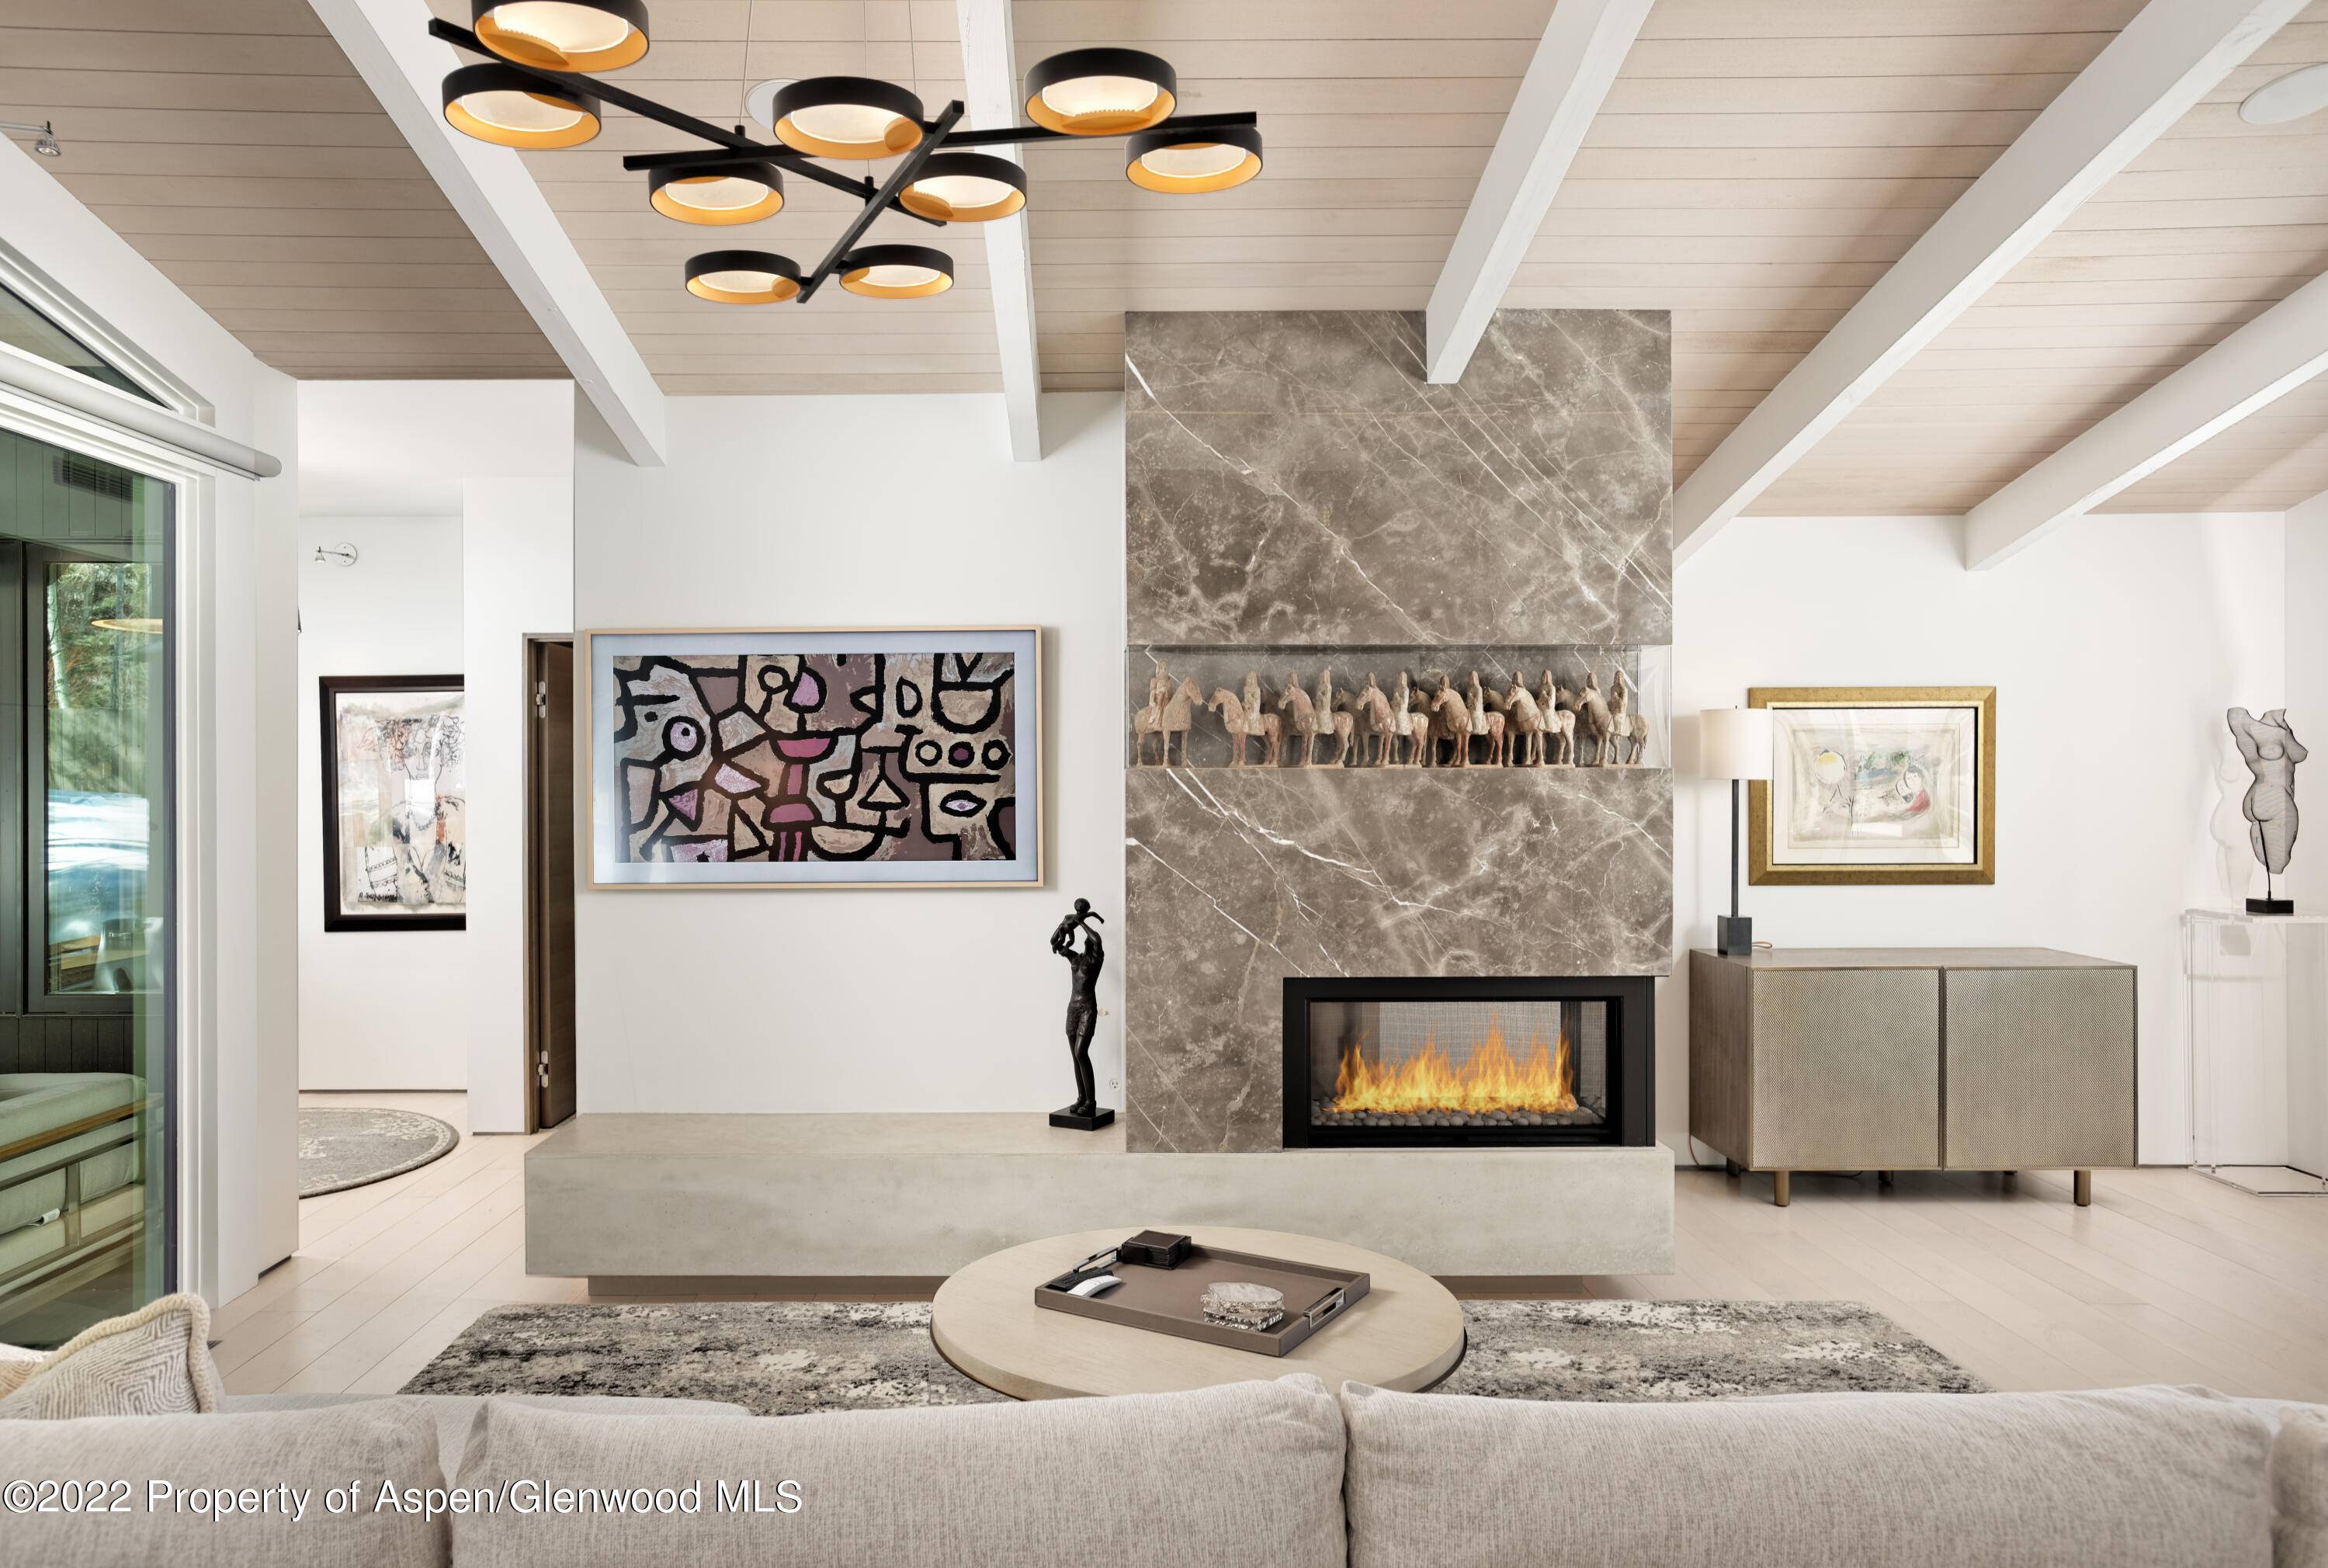 This recently remodeled, contemporary Aspen core home is the perfect place for a getaway, while still being in the heart of the action.